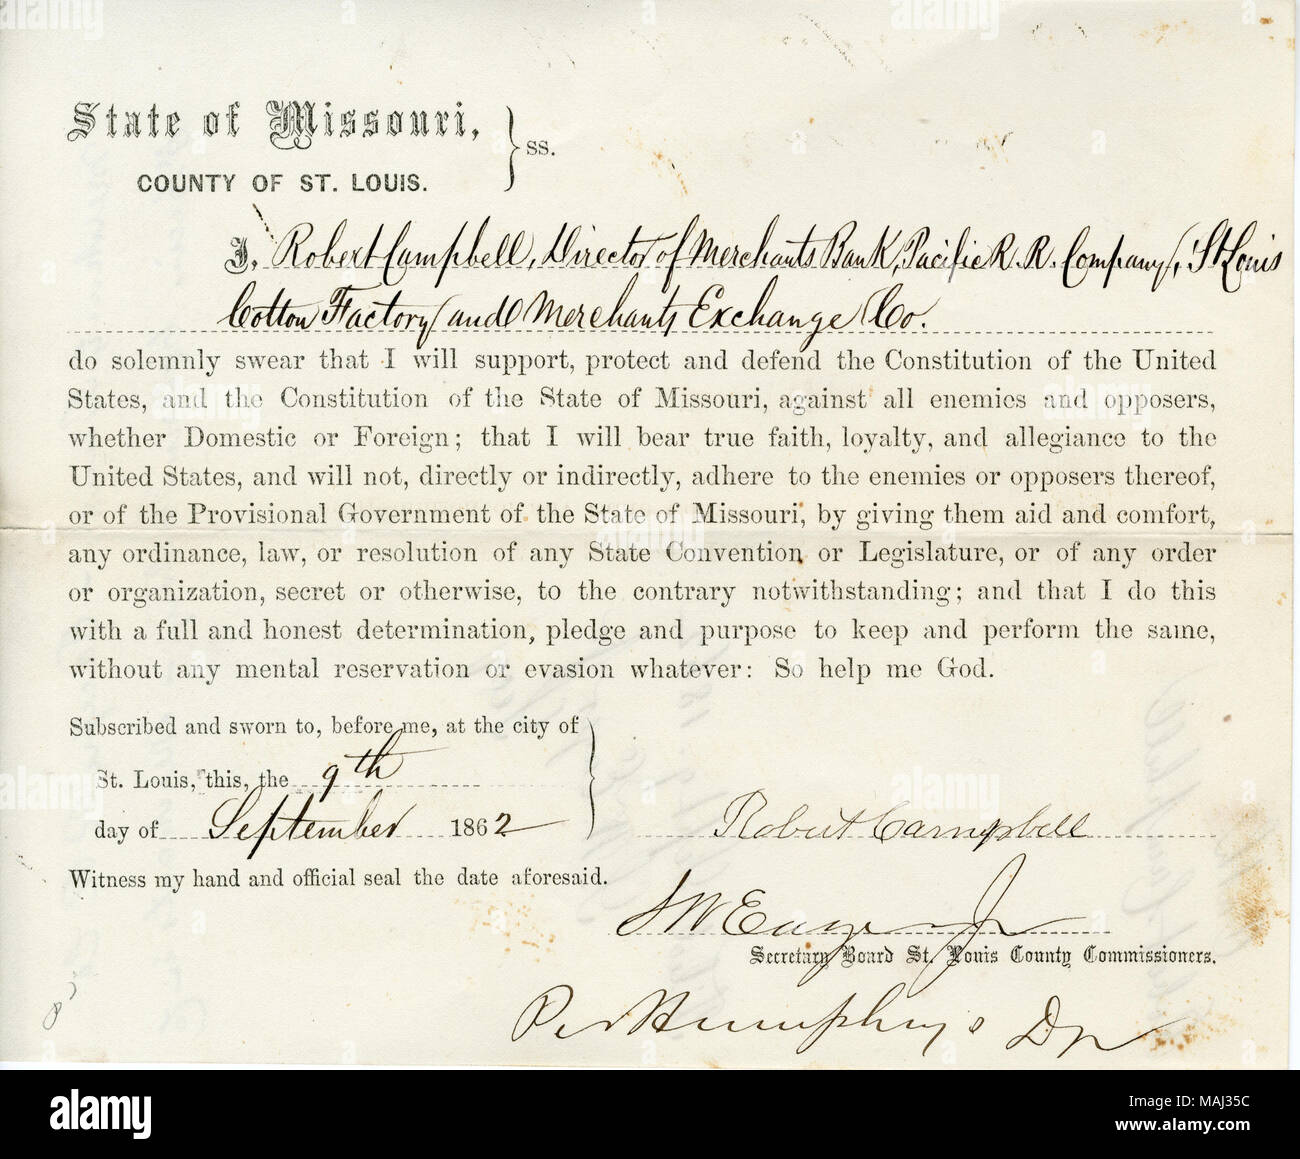 Swears oath of allegiance to the Government of the United States and the State of Missouri. Title: Loyalty oath of Robert Campbell of Missouri, County of St. Louis  . 9 September 1862. Campbell, R. Stock Photo